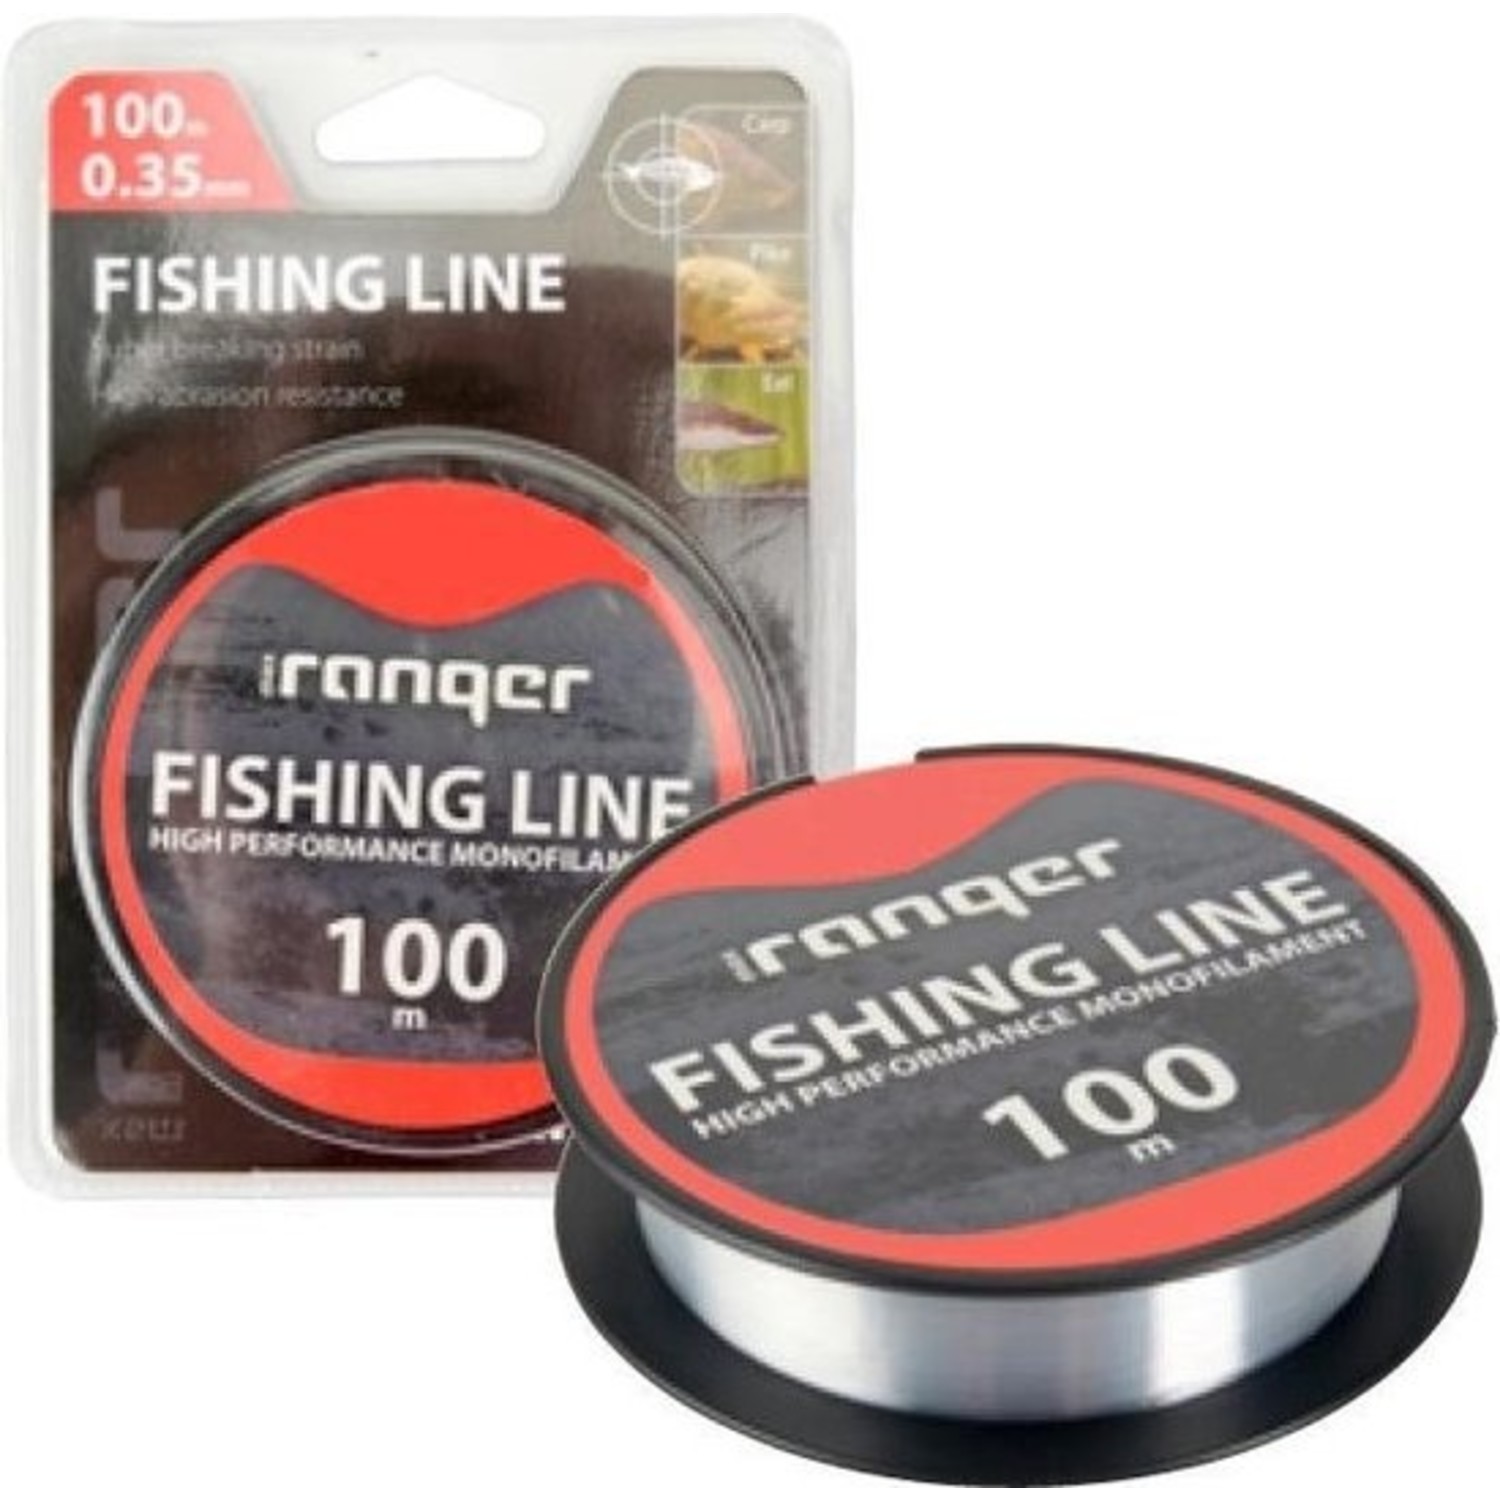 Clear Fishing Line